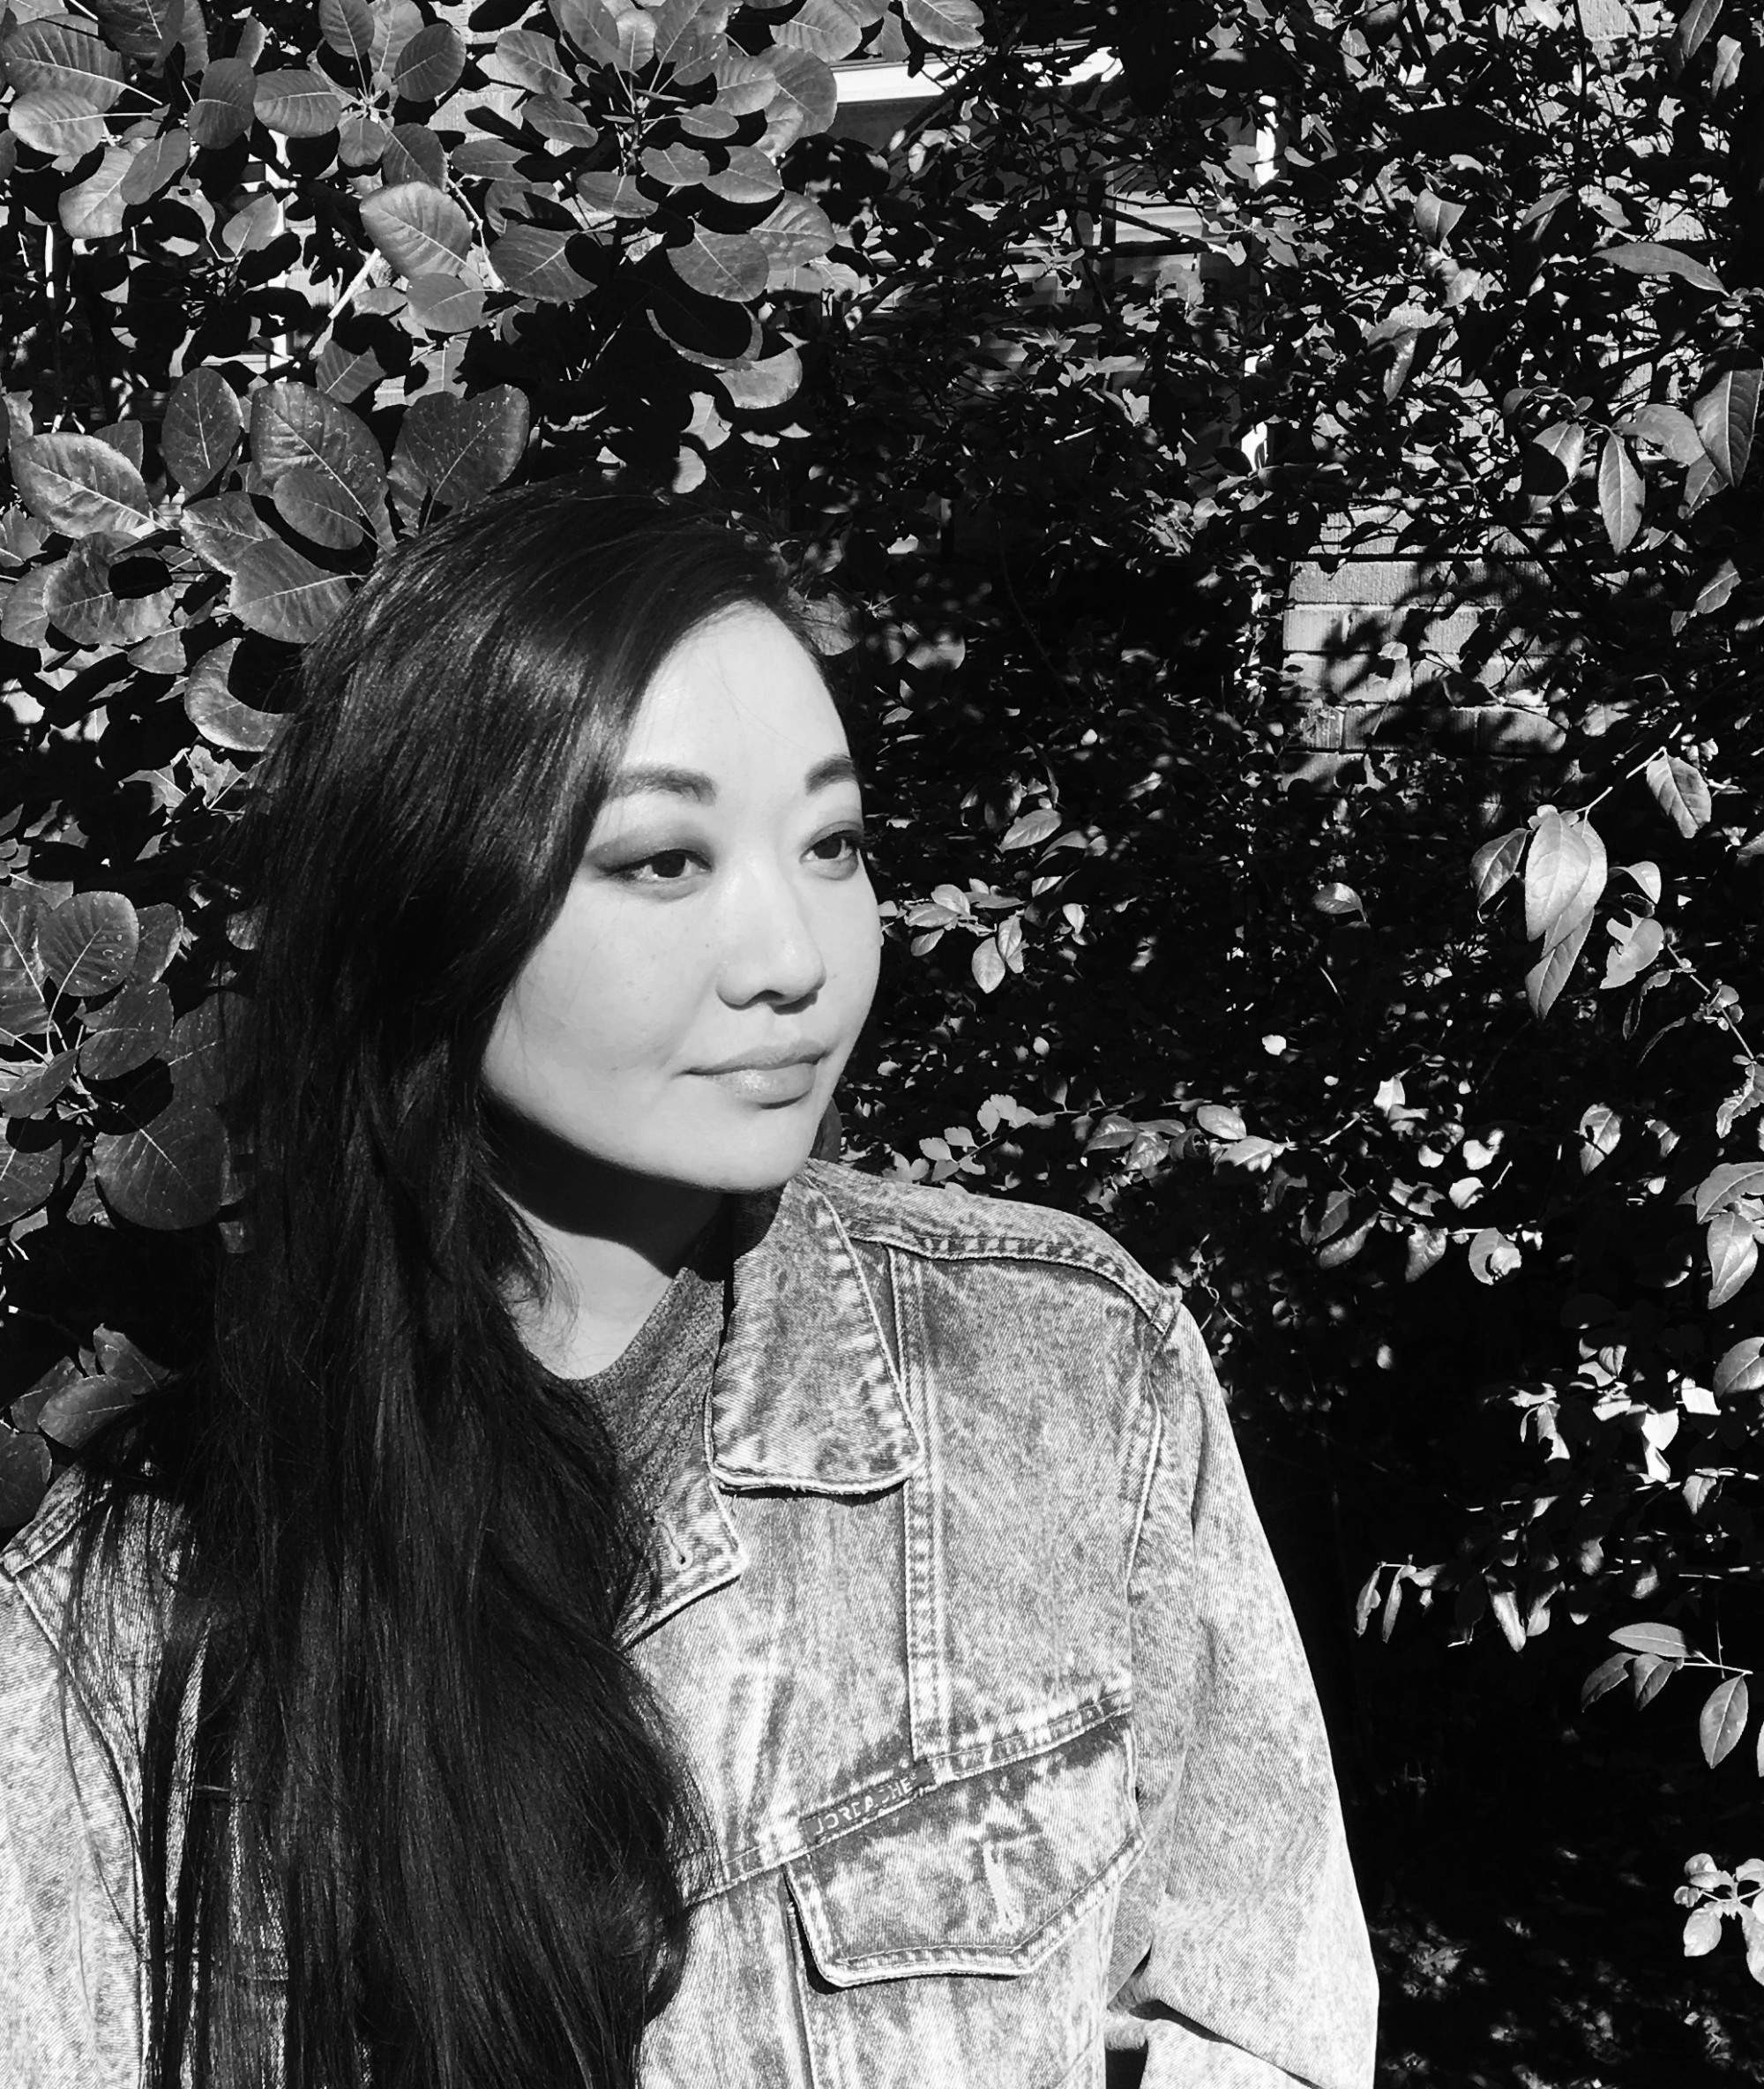 Erinrose Mager is shown in a portrait-oriented black abd white photograph, cropped from just above the waist up. She is wearing a denim jacket, her hair is loose over her shoulder, and she is looking off to the right of the frame. Behind her is tall shrubbery.